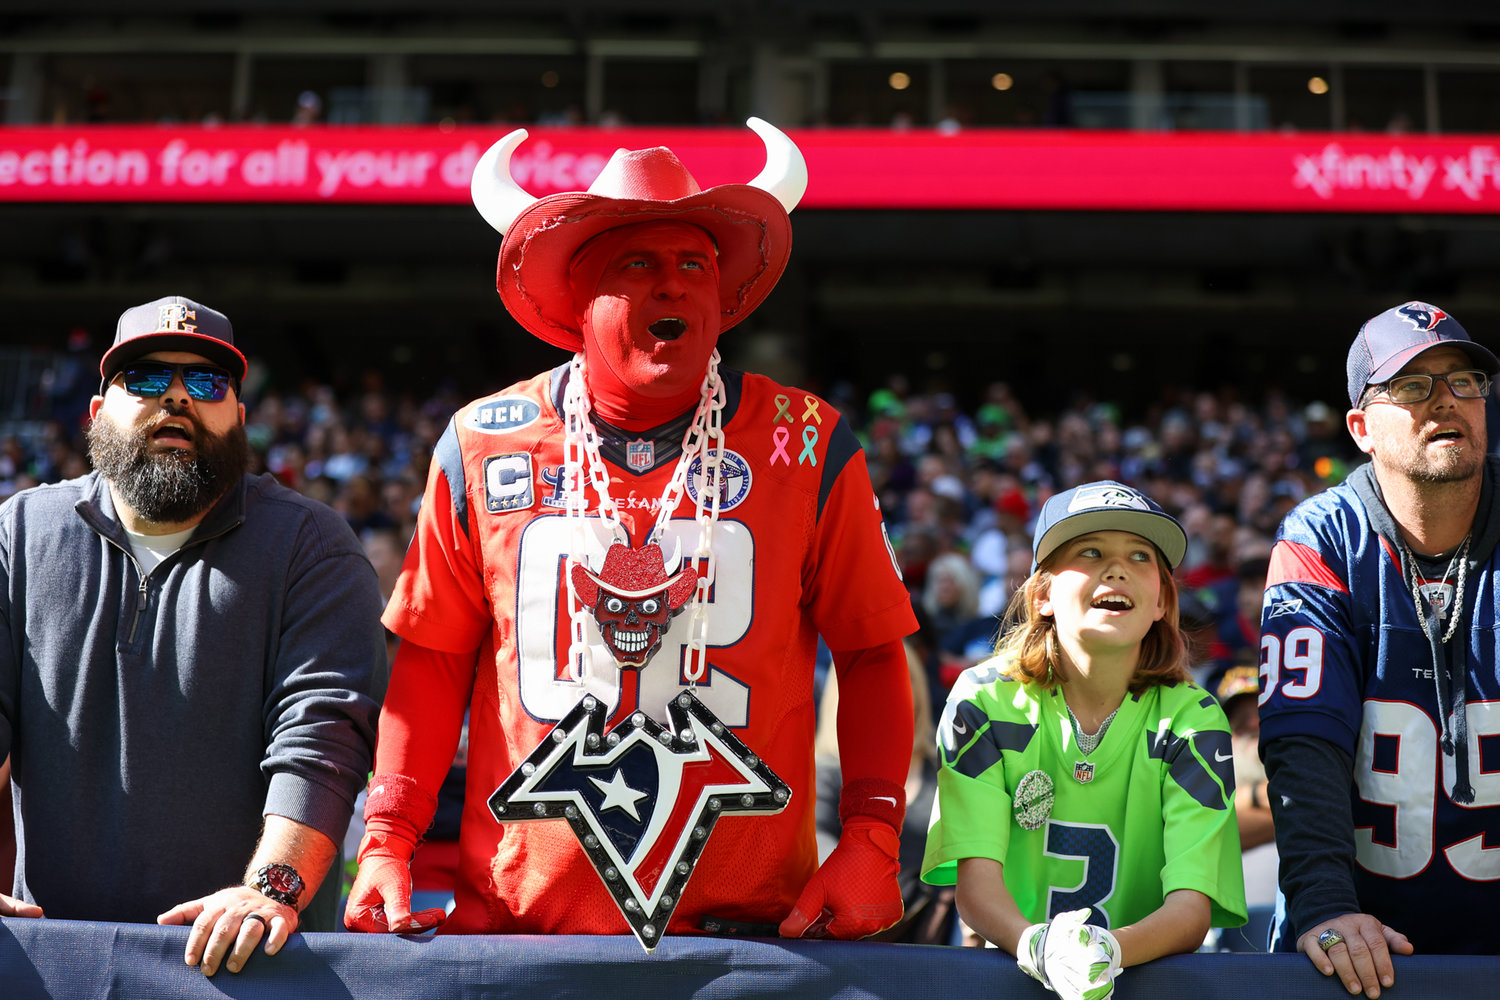 Houston Texans and Seattle Seahawks fans cheer during the first half of an NFL game between the Seahawks and the Texans on December 12, 2021 in Houston, Texas.